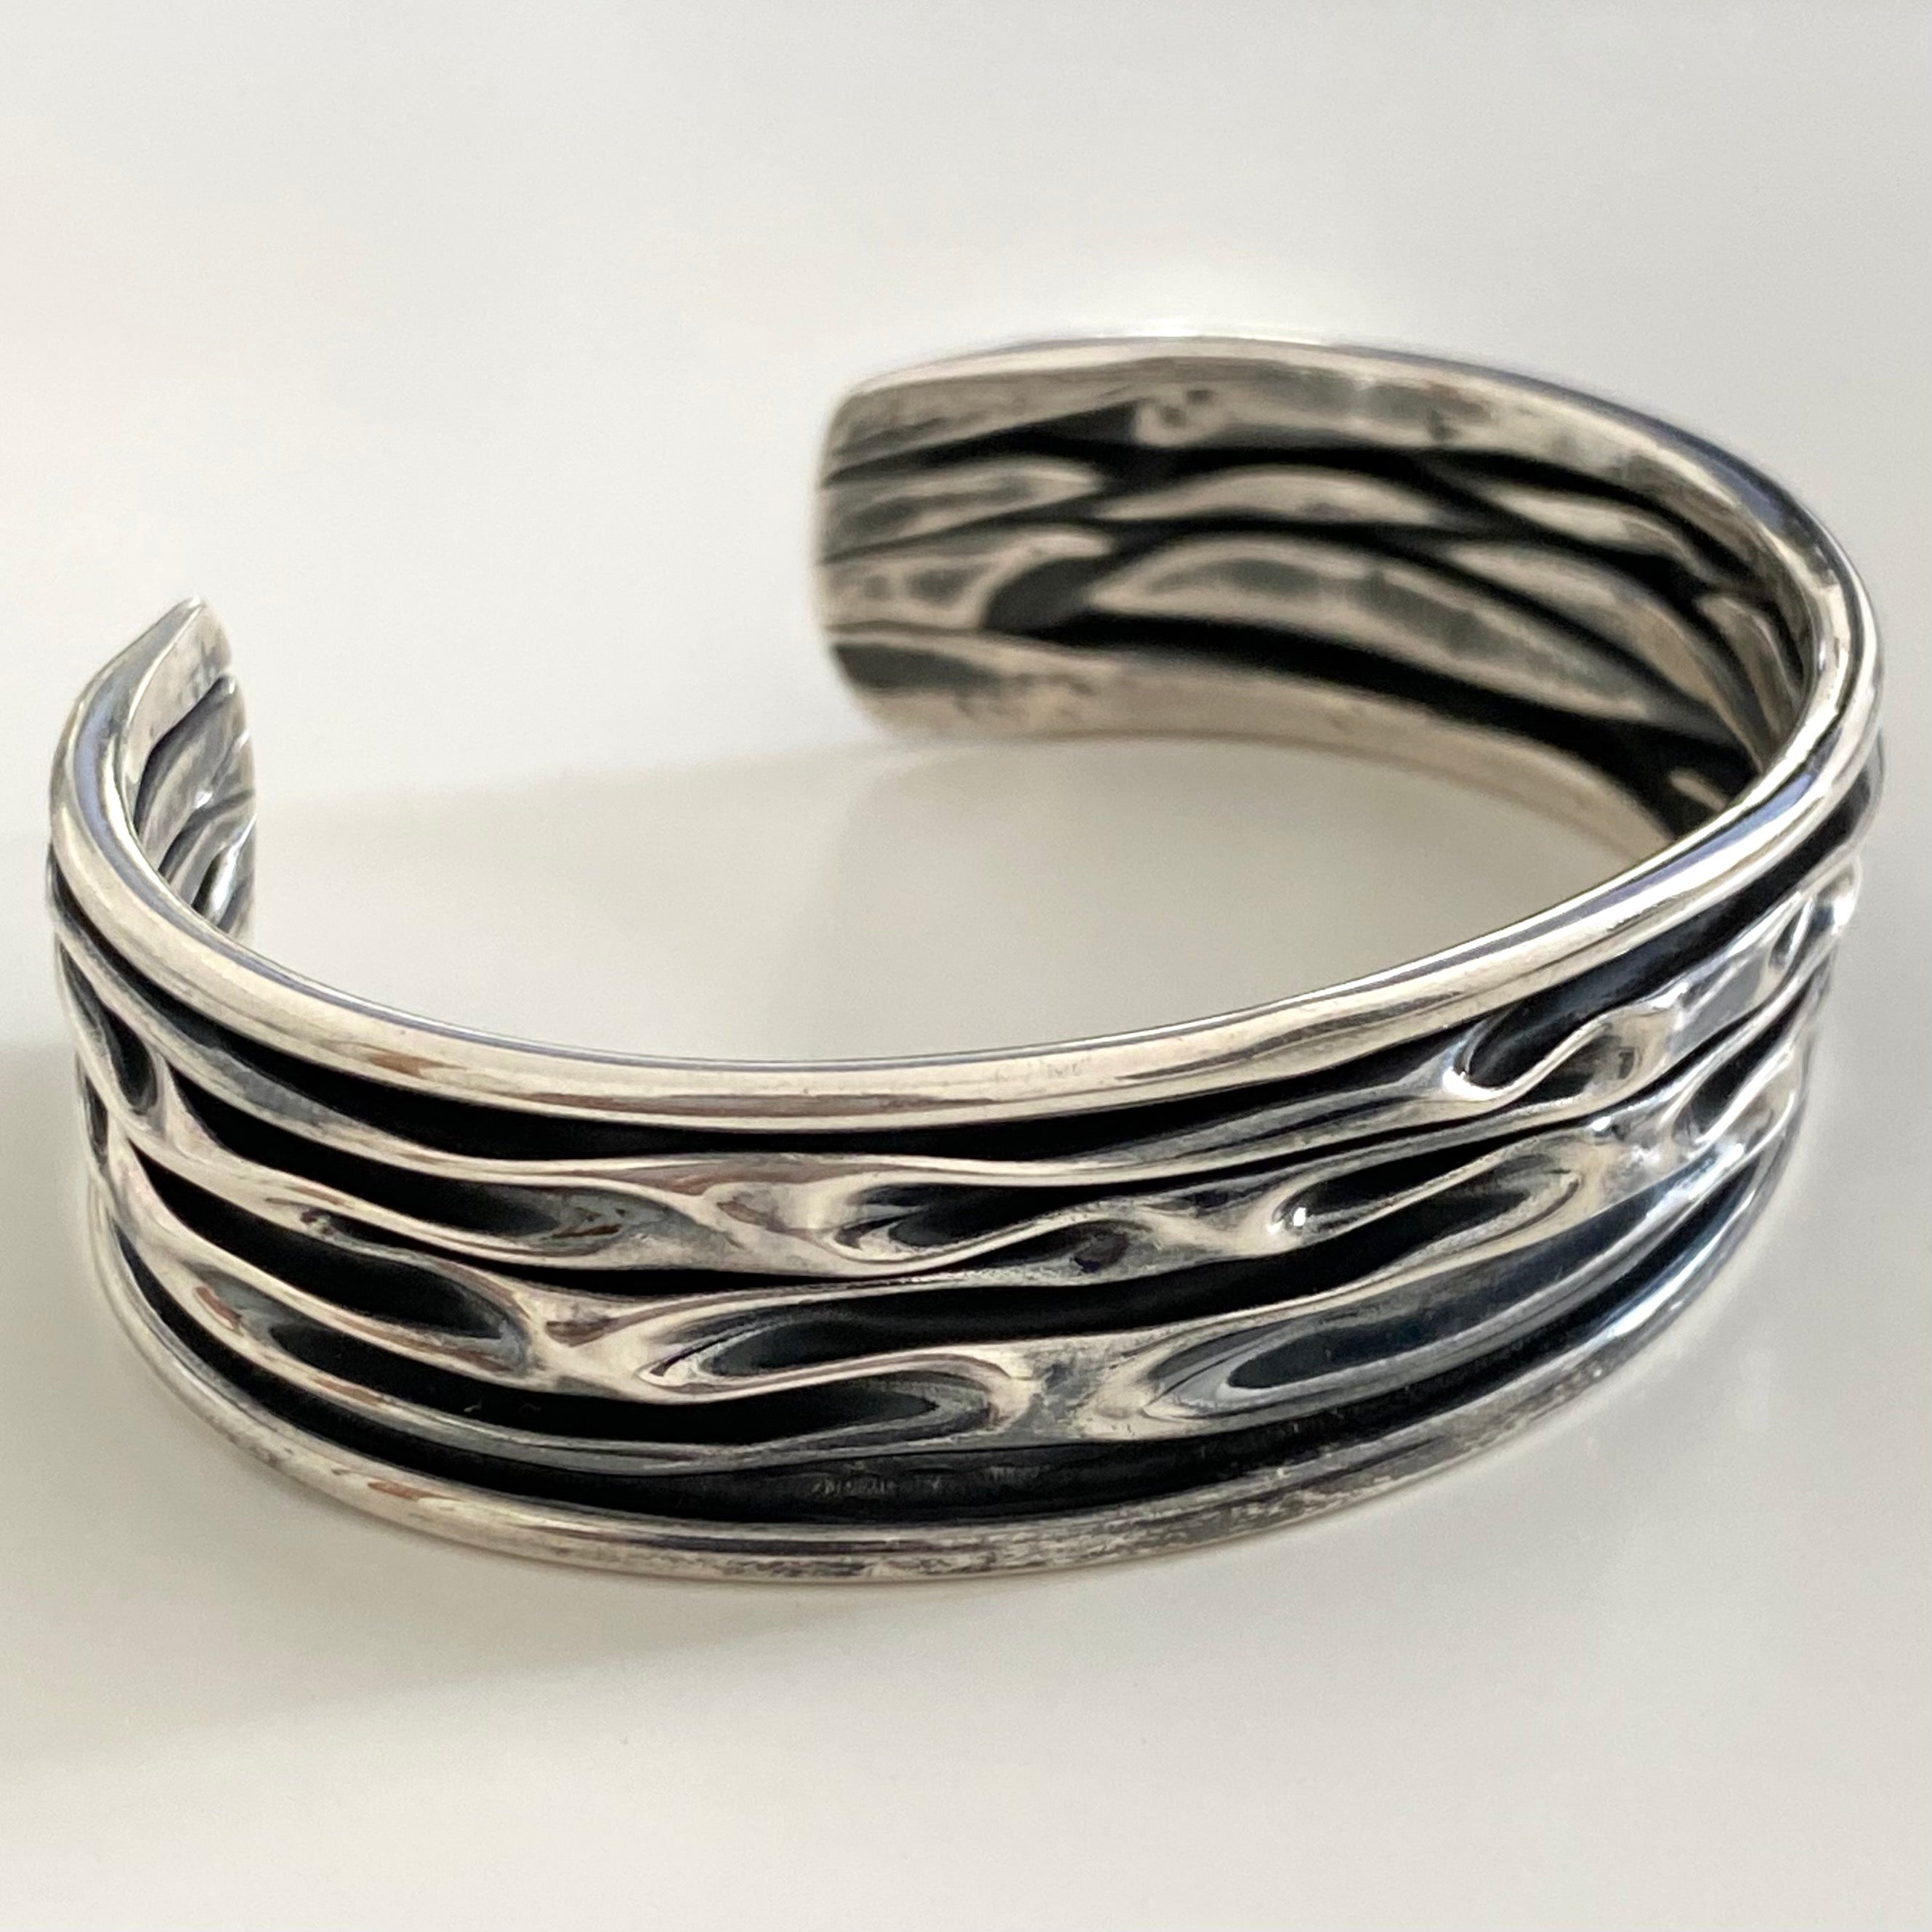 Oxidised Sterling Silver Textured Patterned Cuff - Narrow